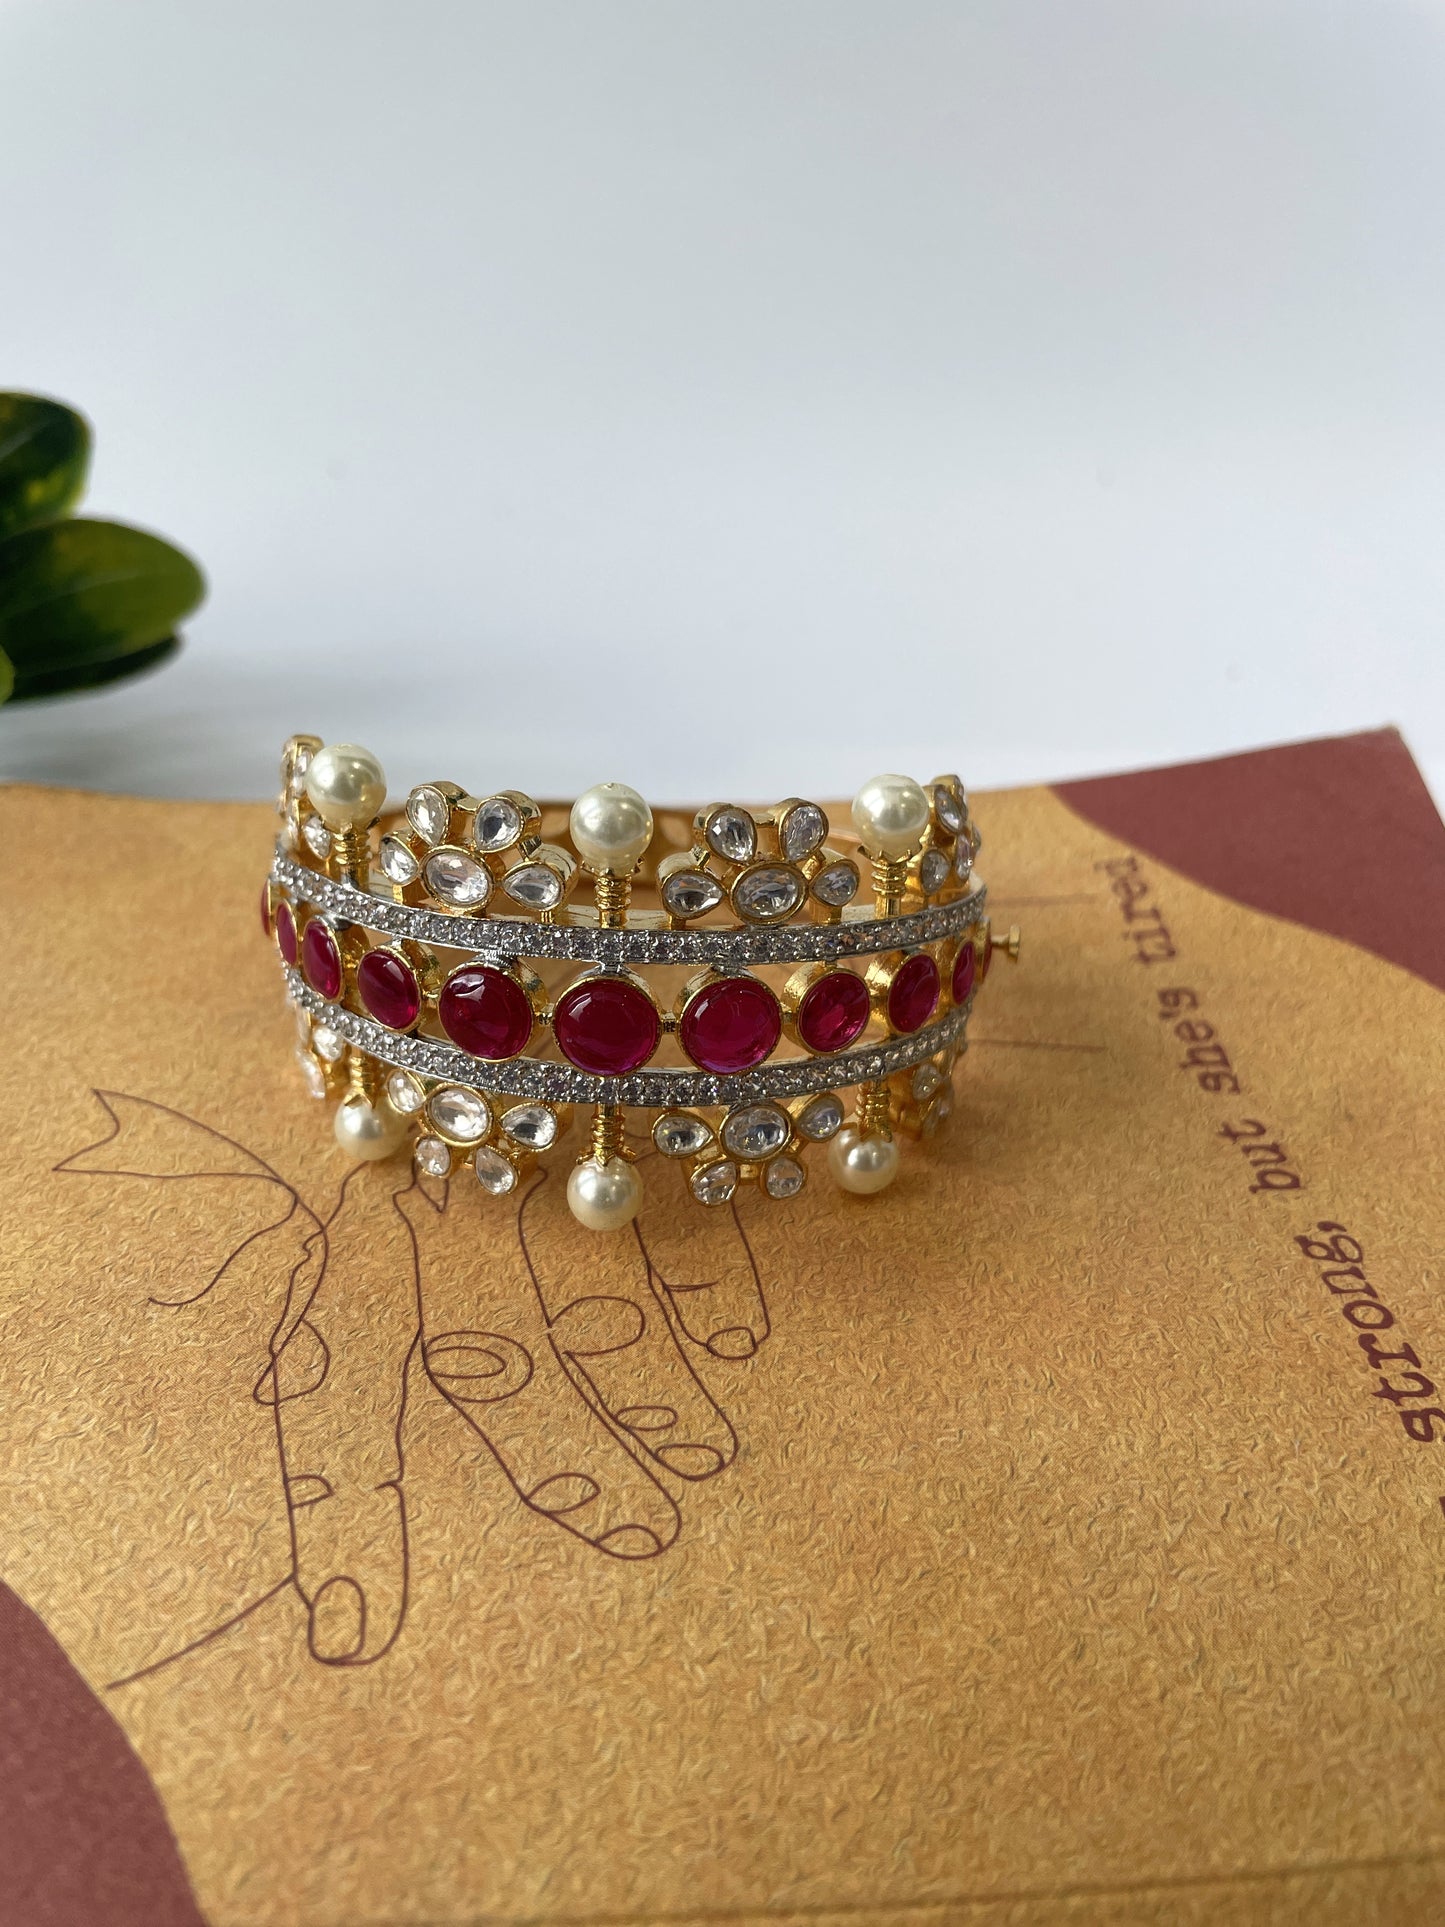 Zircon Bangles with Red Beads and Pearls